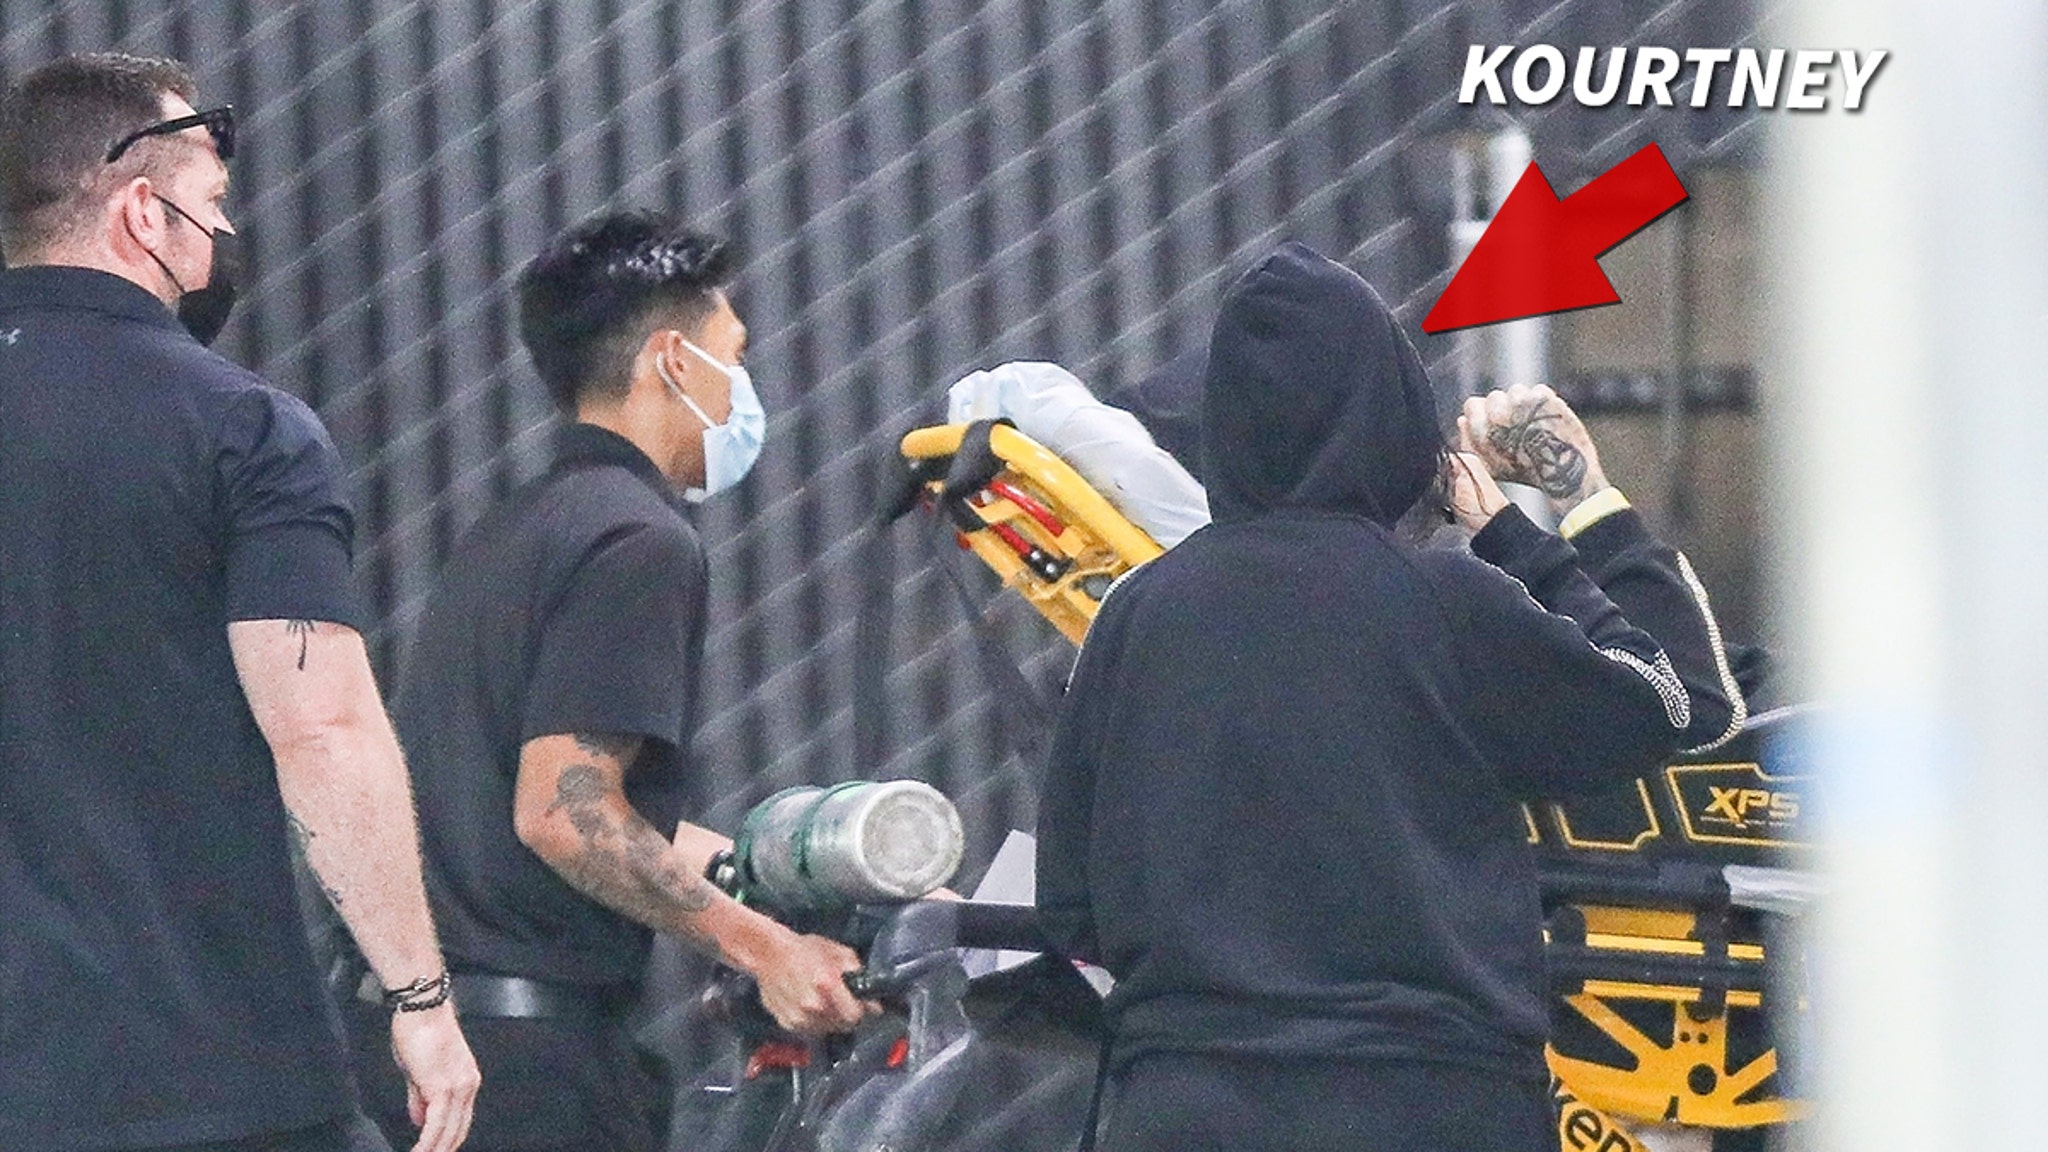 You are currently viewing Travis Barker Hospitalized, Kourtney Kardashian There, Daughter Asks for Prayers